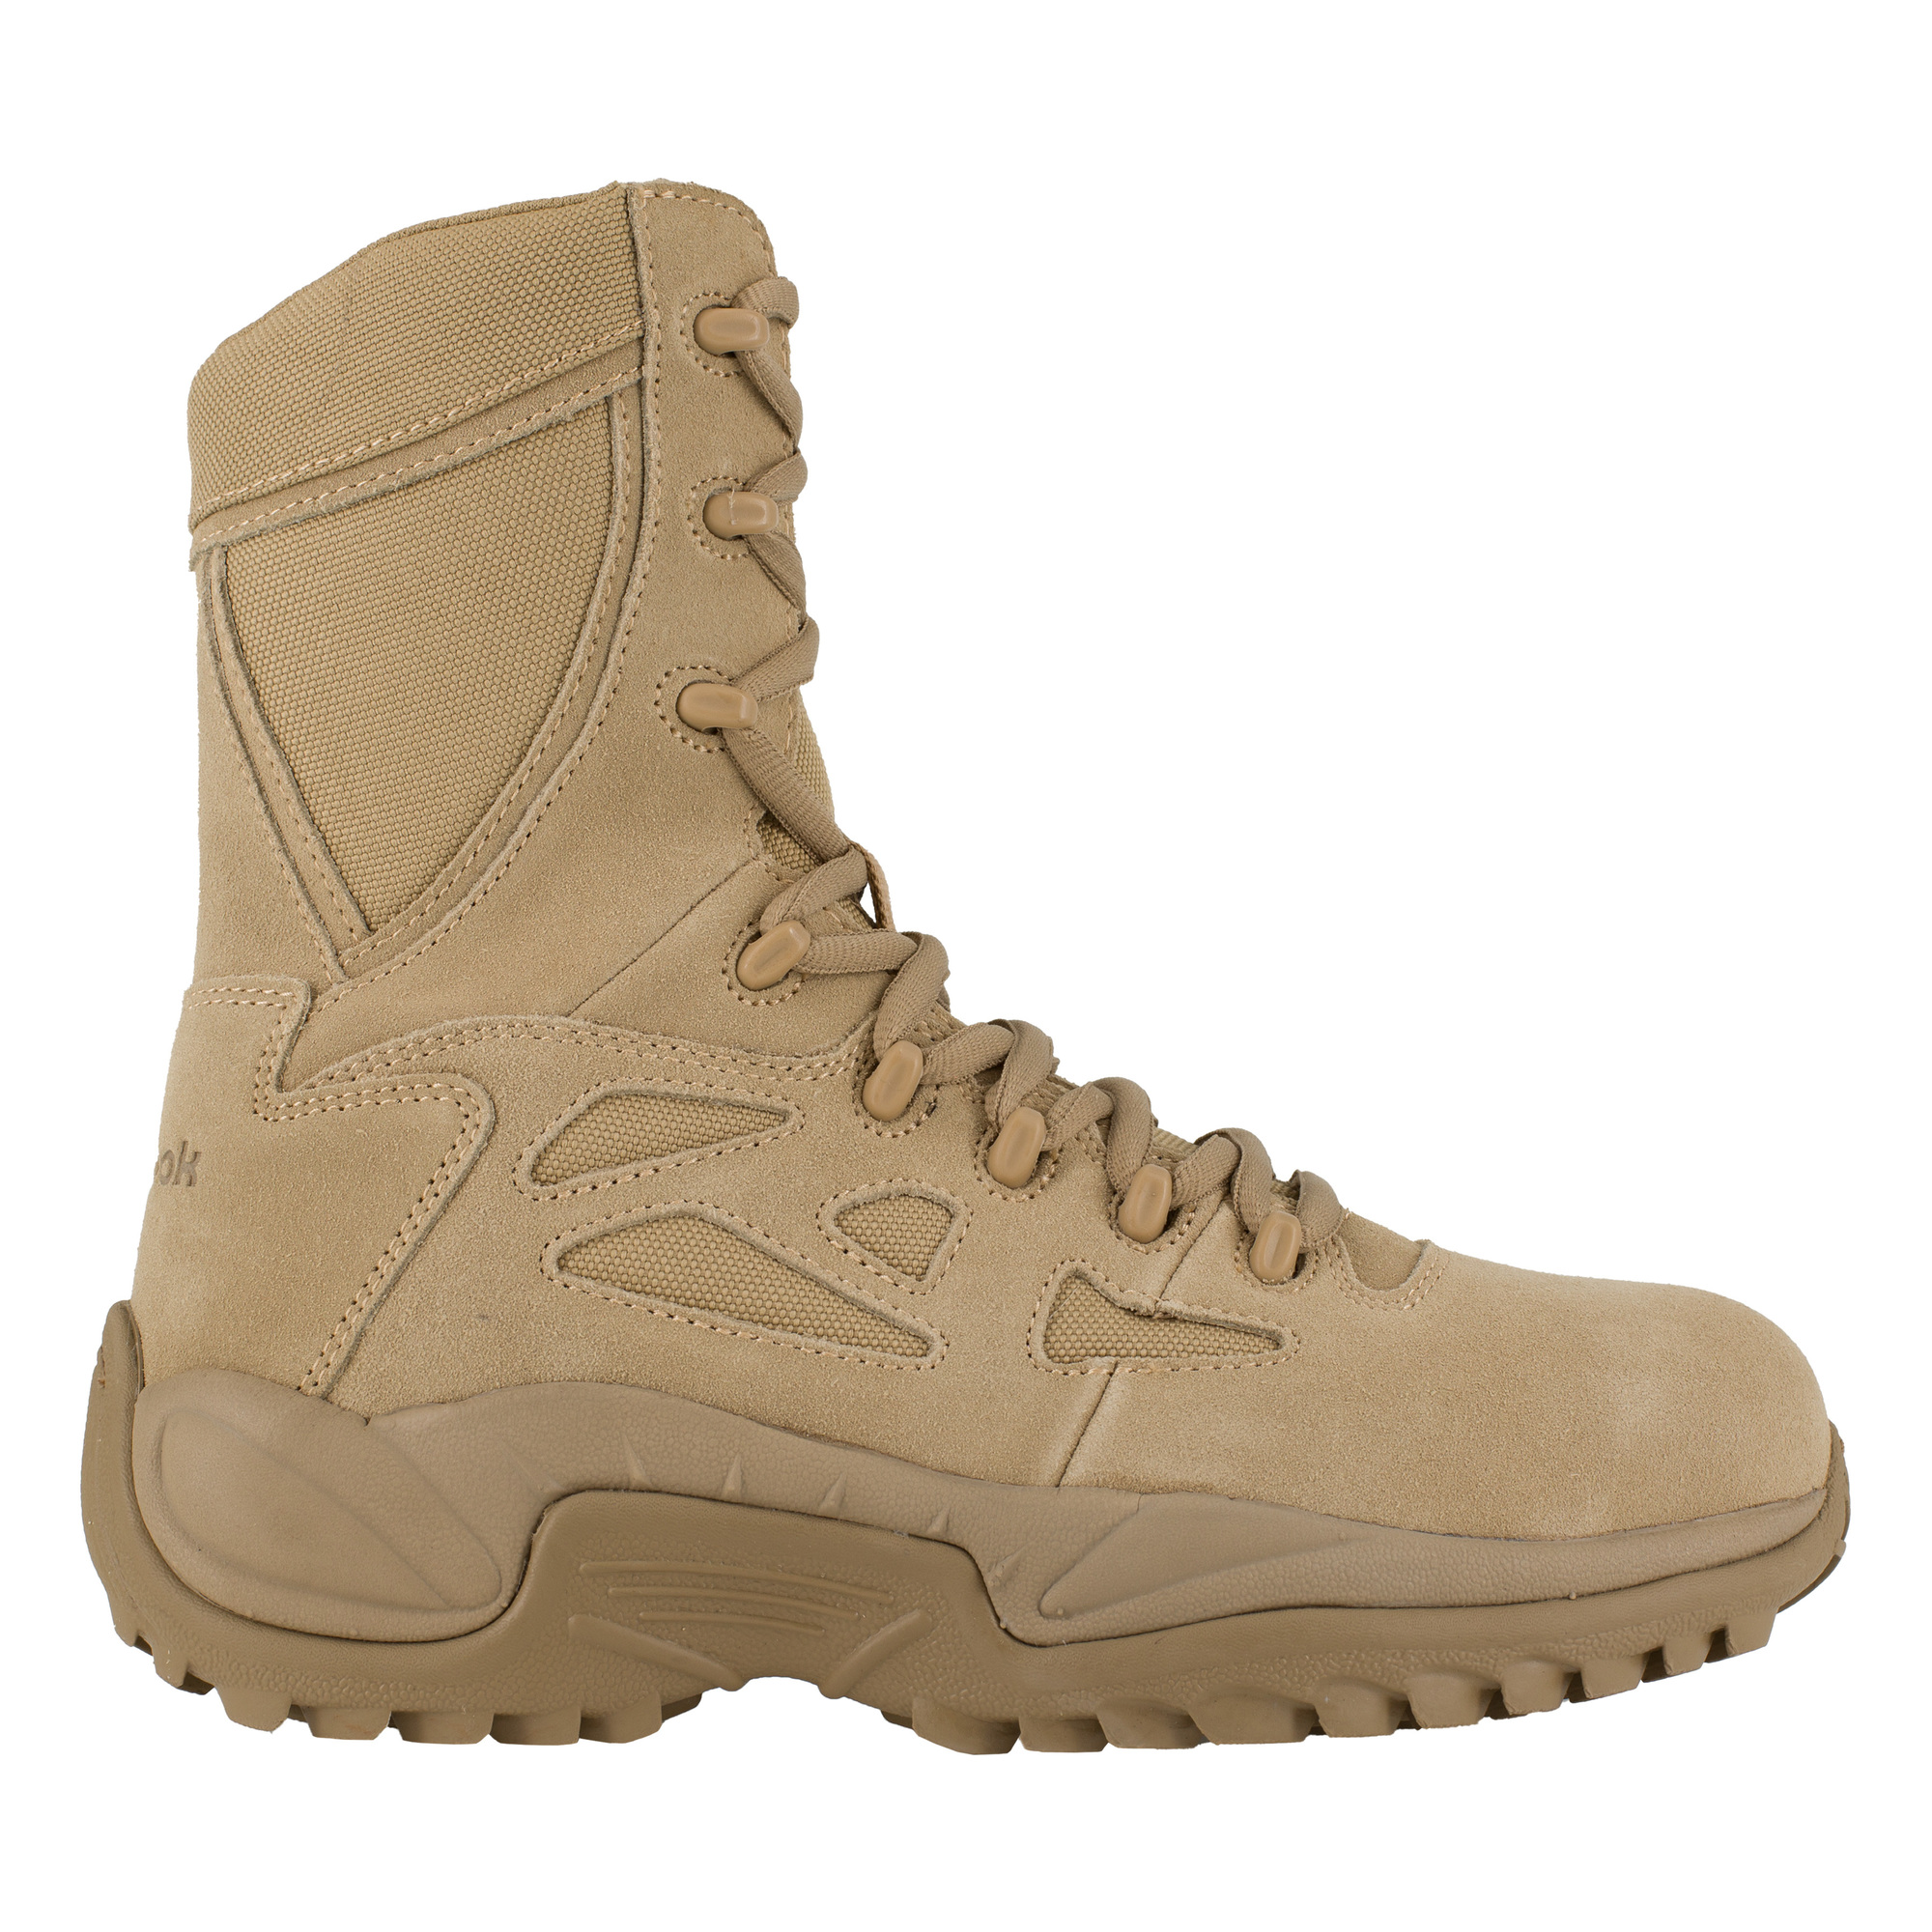 Reebok, 8Inch Stealth Tactical Boot with Side Zipper, Size 6 1/2, Width Medium, Color Desert Tan, Model RB894